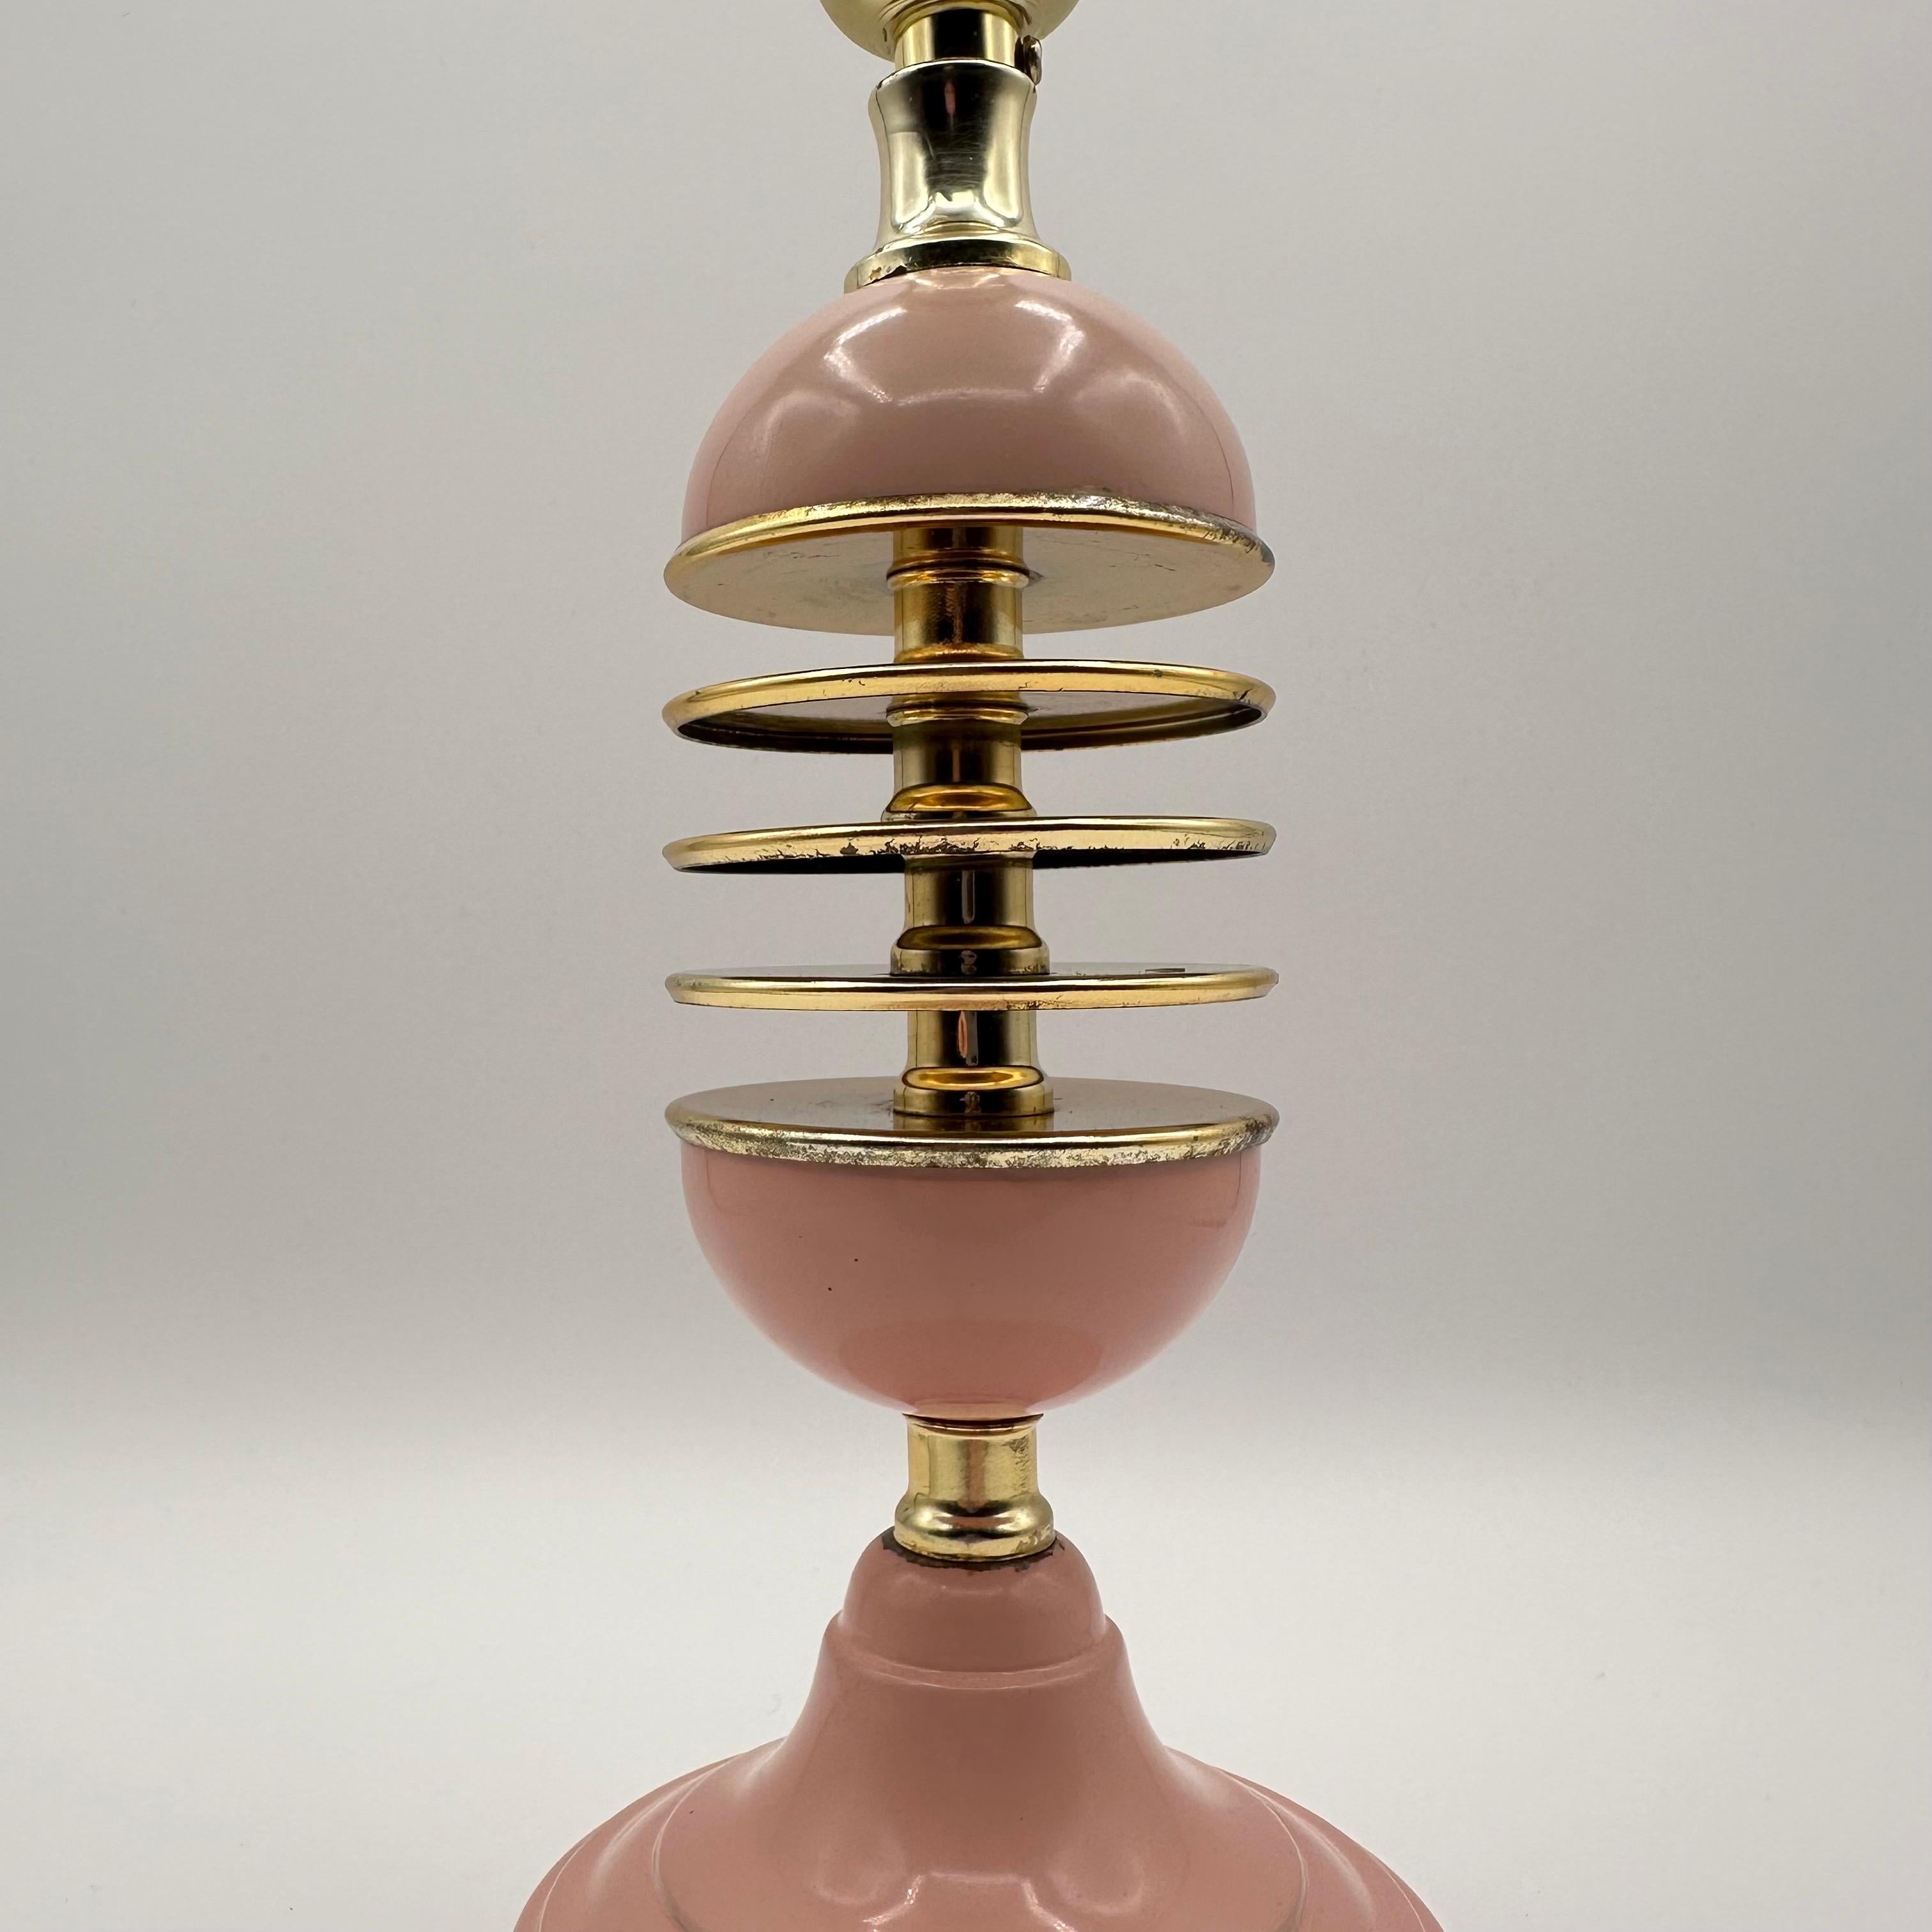 Vintage Pink and Brass Table Lamp with Round Floating Disc Body In Fair Condition For Sale In Amityville, NY